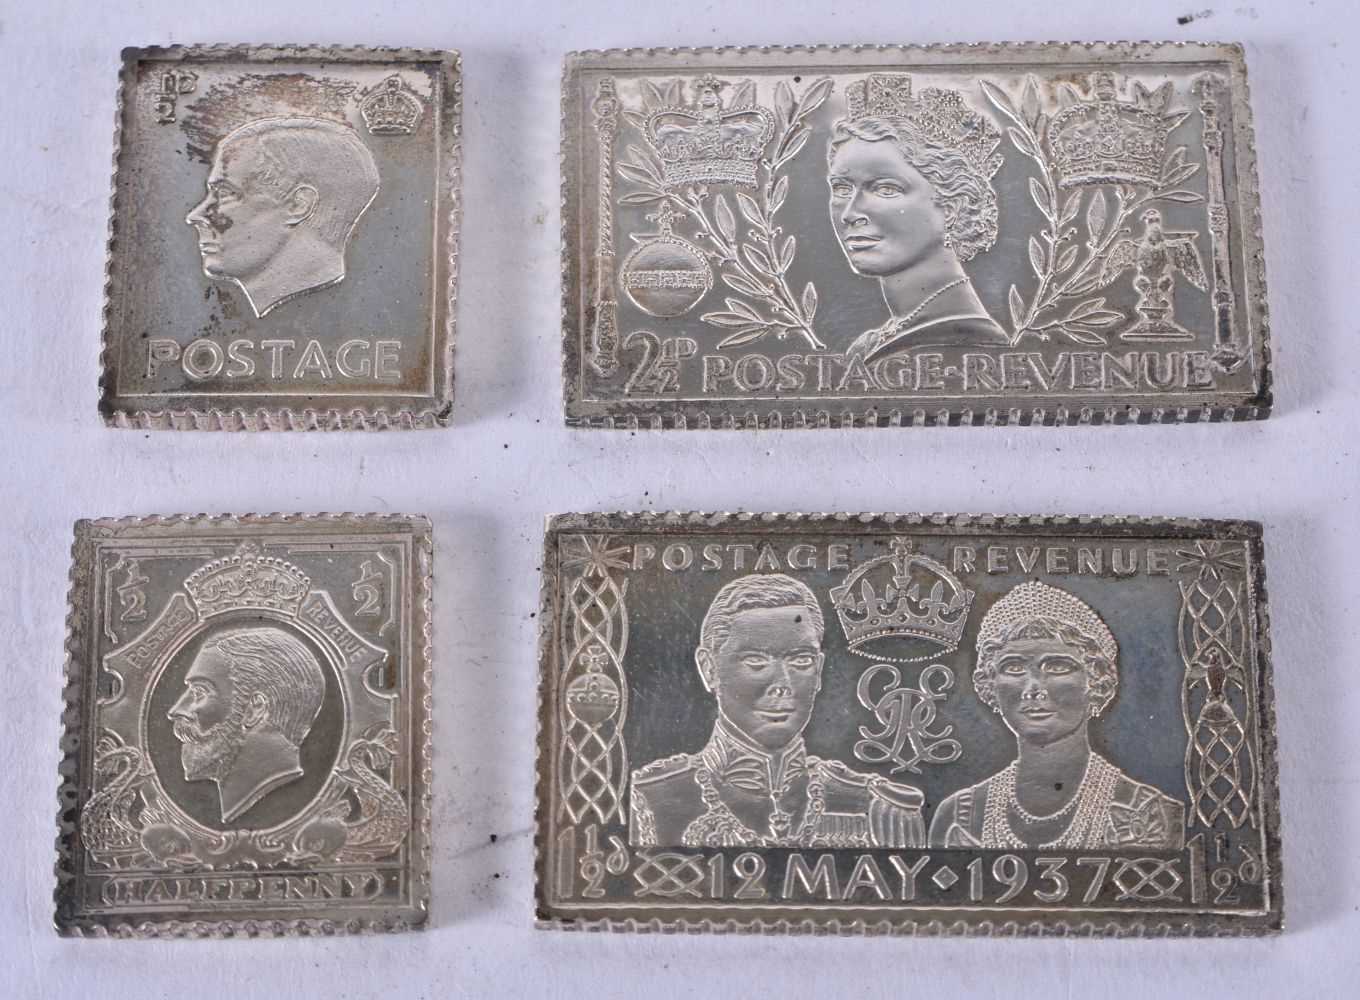 Boxed silver commemorative Postage Revenue ingots. Hallmarked Birmingham 1978, Weight of Silver 52. - Image 3 of 5